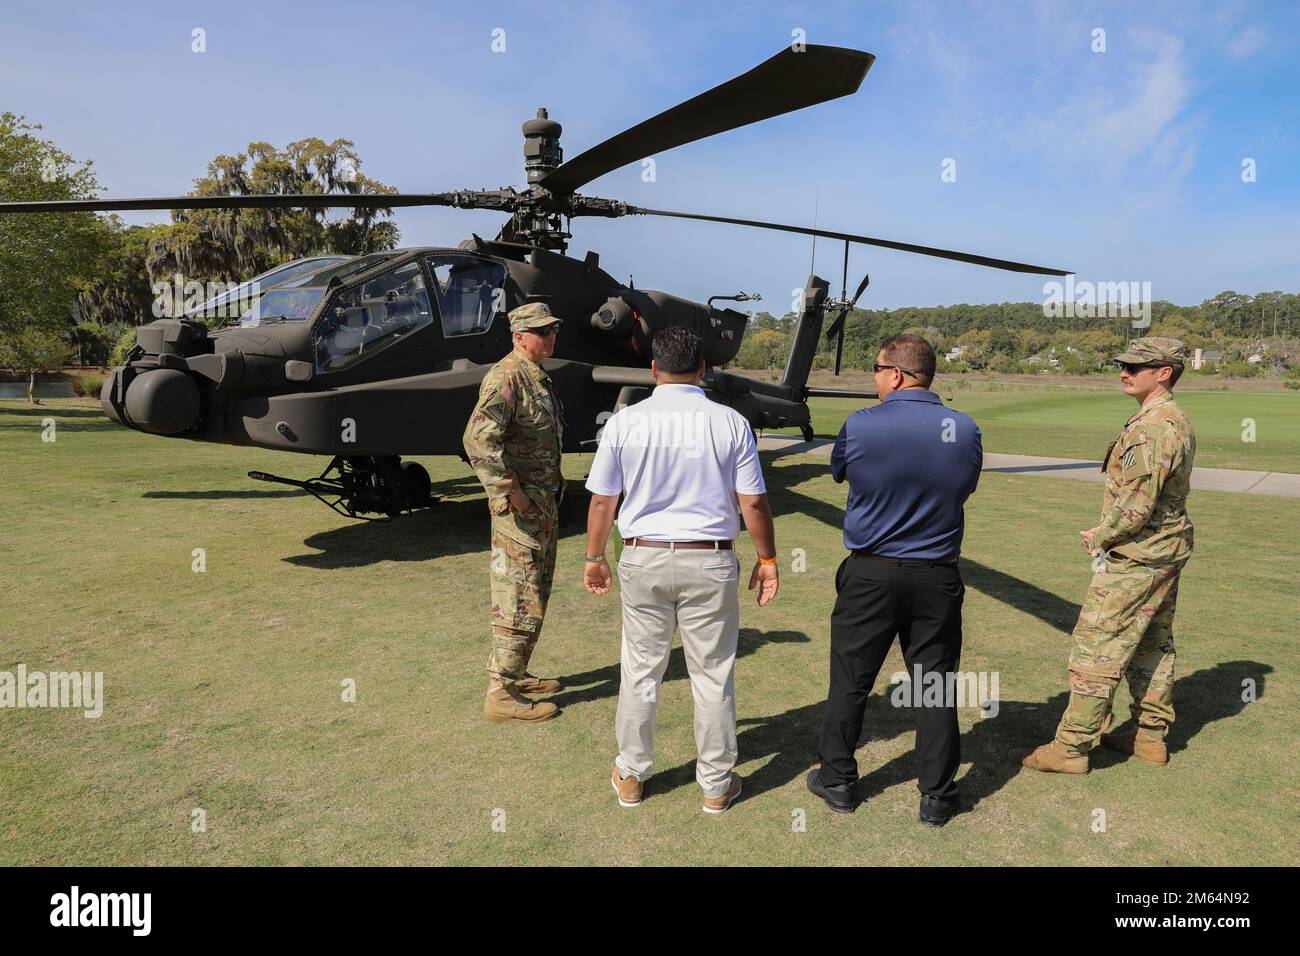 A 3rd Infantry Division Soldier describes the role of the AH-64E Apache at the Deer Creek Course at The Landings Club, Savannah, Georgia, April 2, 2022. The static vehicle display was a part of Military Appreciation Day, held on the second to last day of the Club Car Championship. Stock Photo